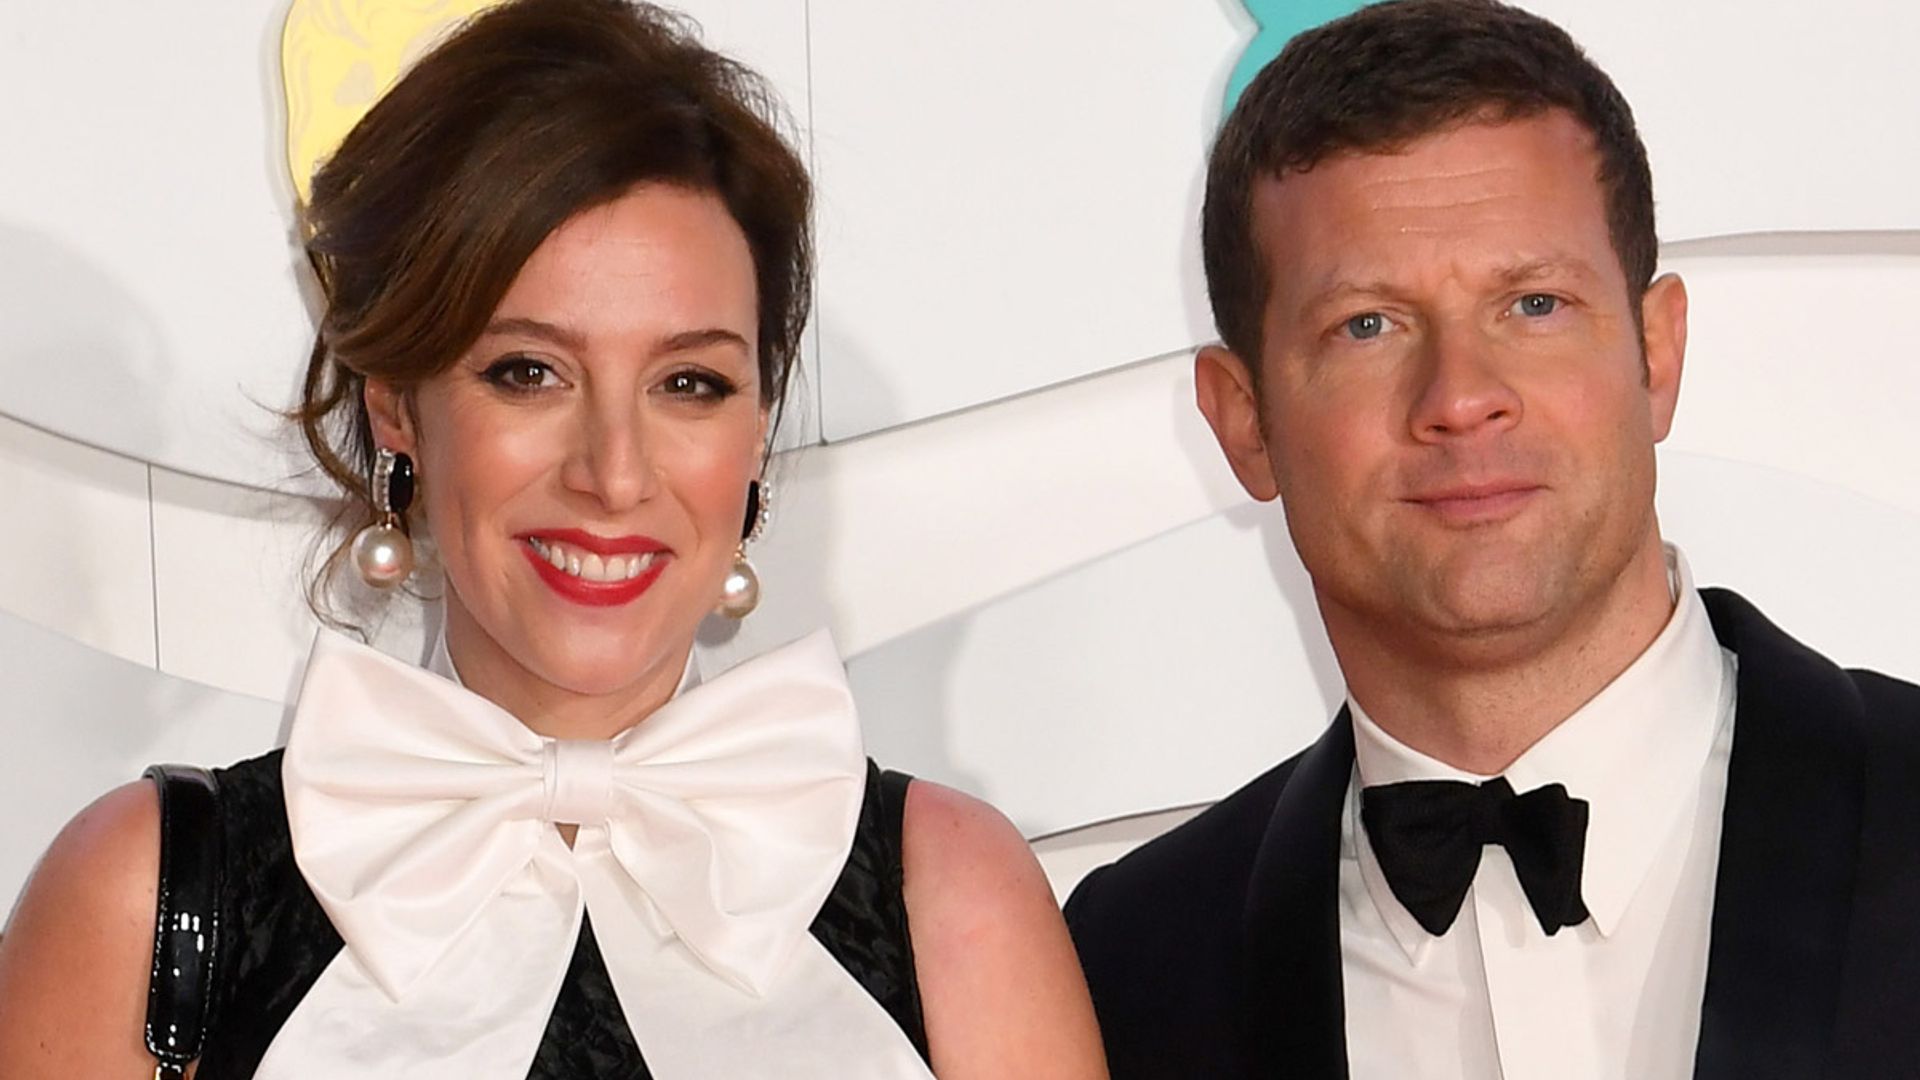 Dermot O'Leary's pregnant wife Dee Koppang shows off blossoming baby bump at the 2020 BAFTAs